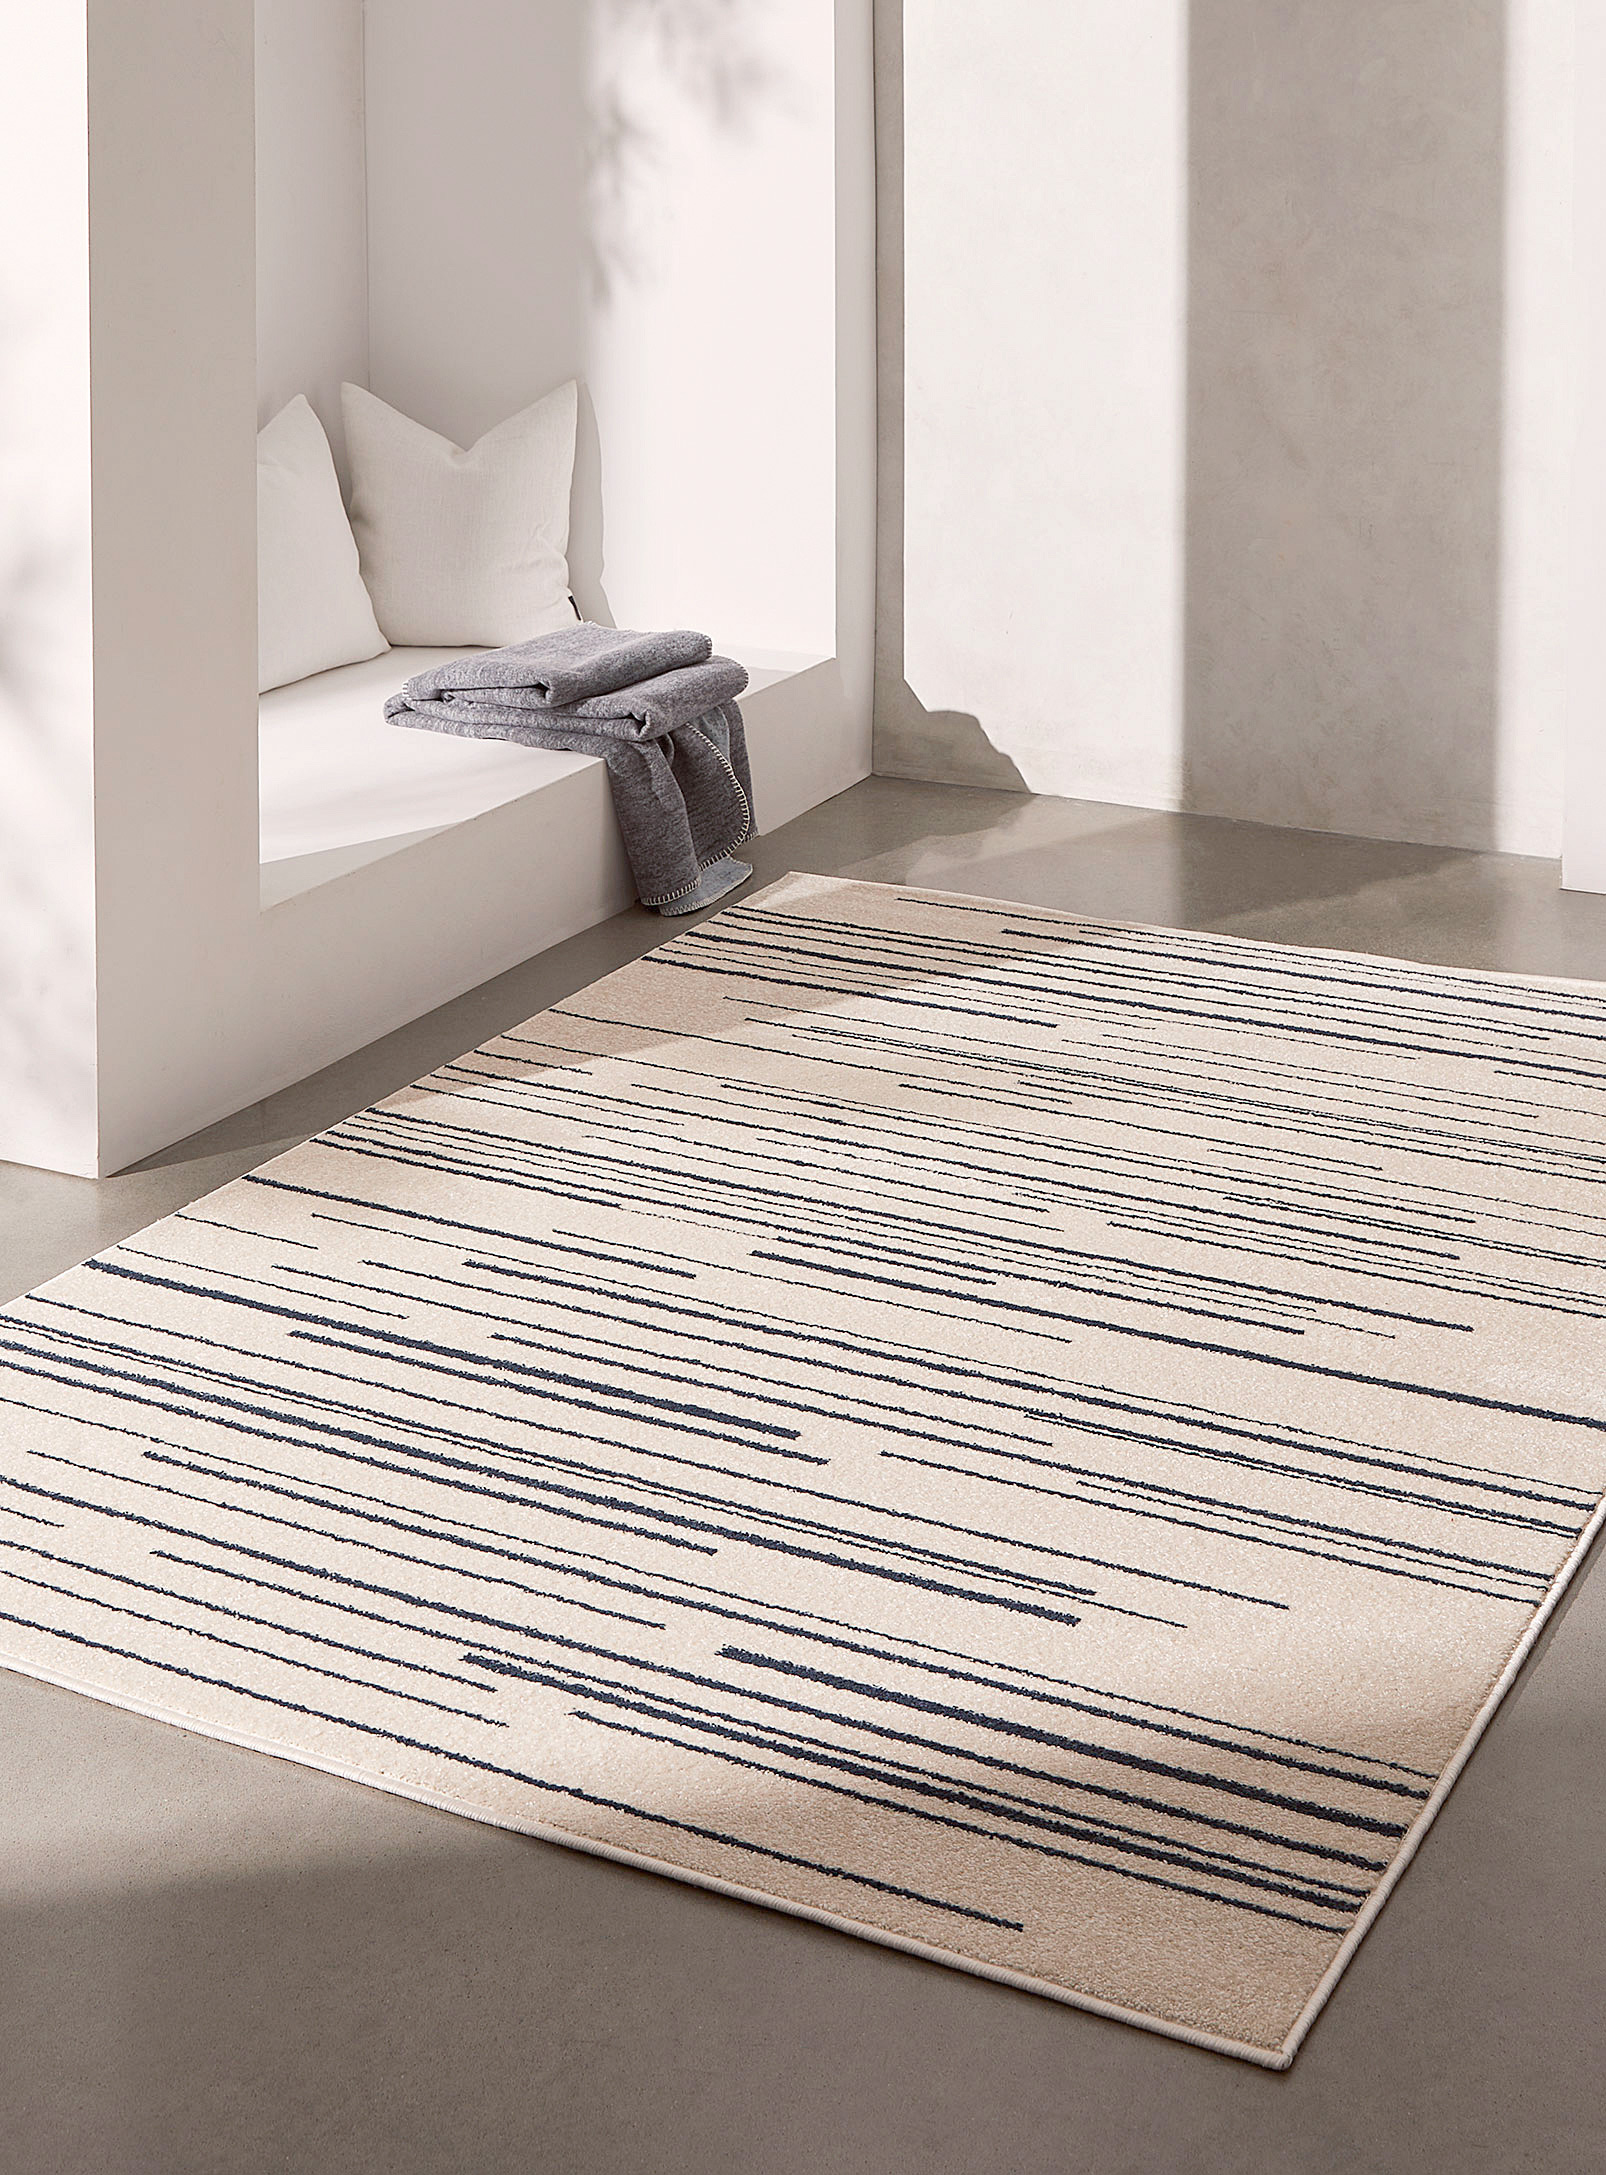 Simons Maison Graphic Lines Rug See Available Sizes In Patterned Ecru